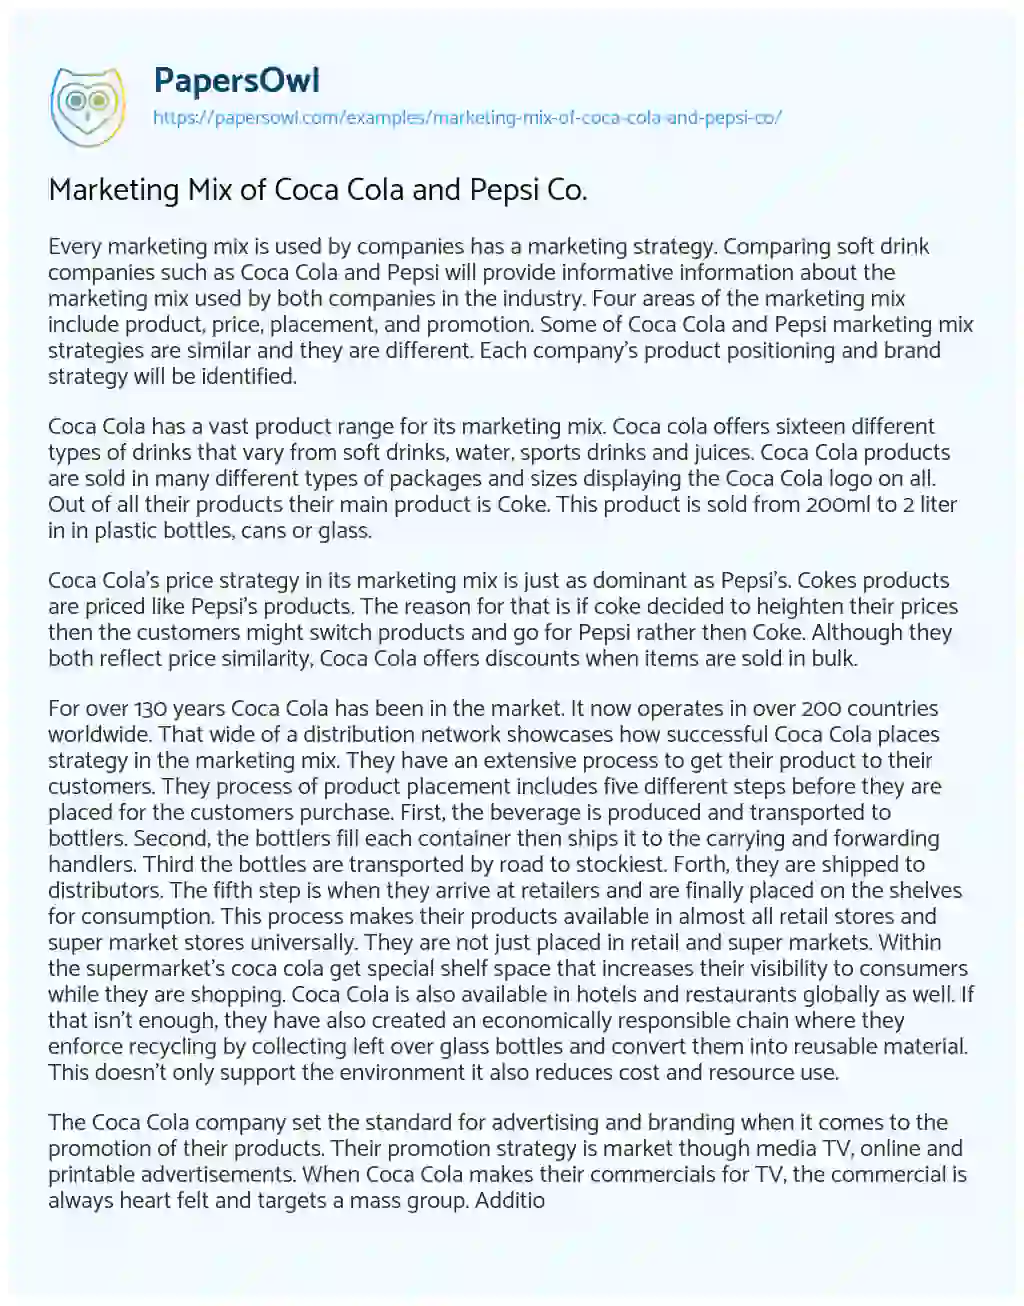 Essay on Marketing Mix of Coca Cola and Pepsi Co.